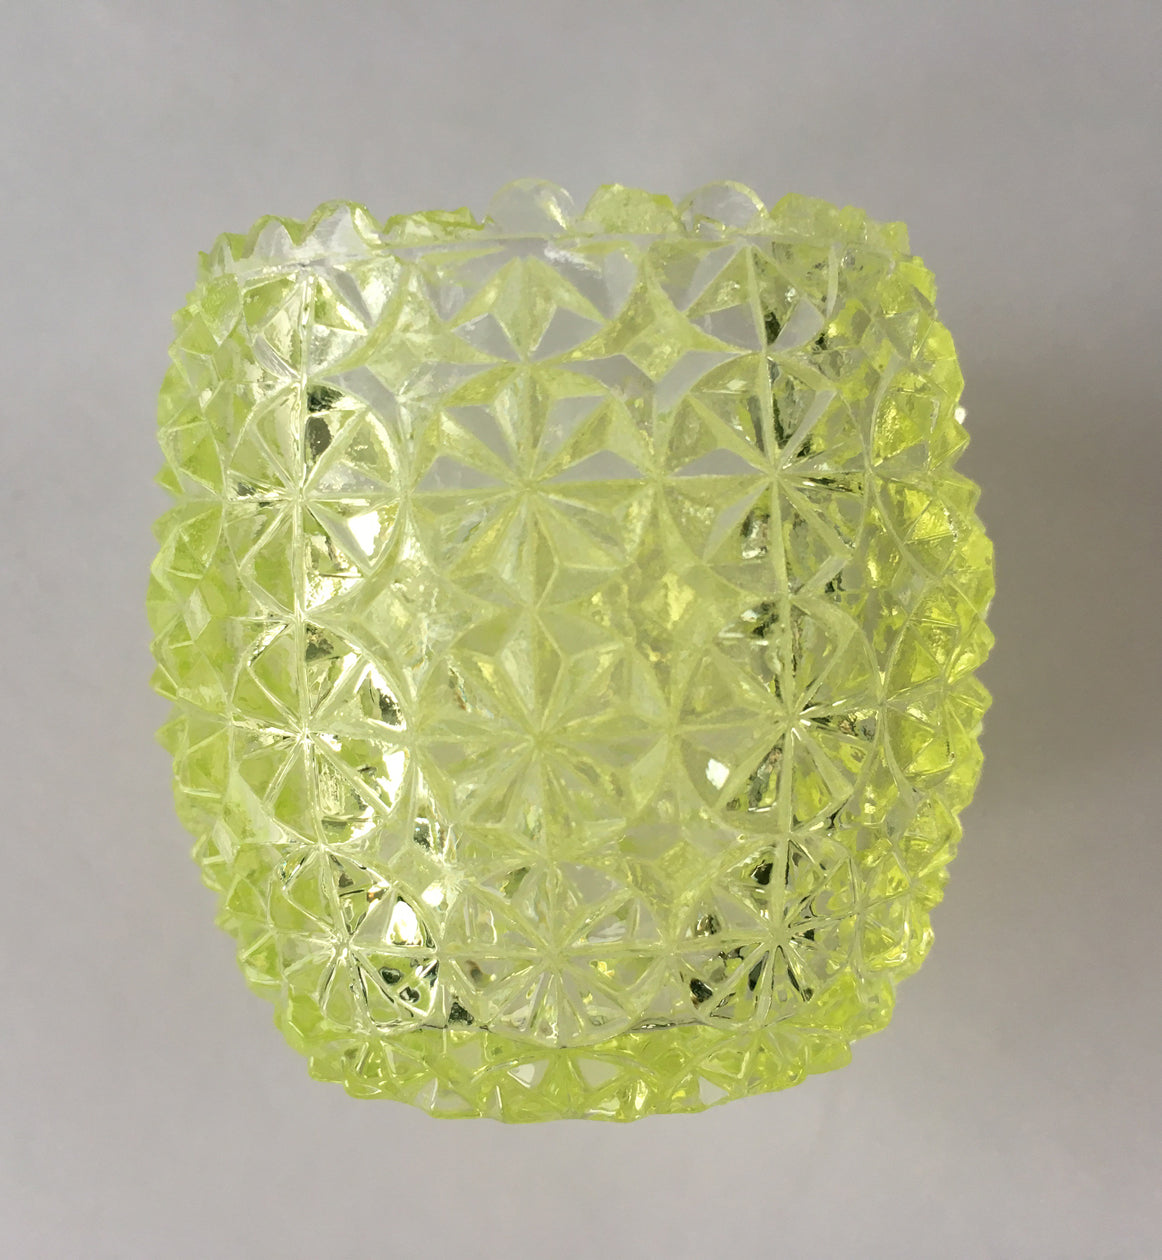 EAPG Daisy Rosette pattern canary glass toothpick holder side view image